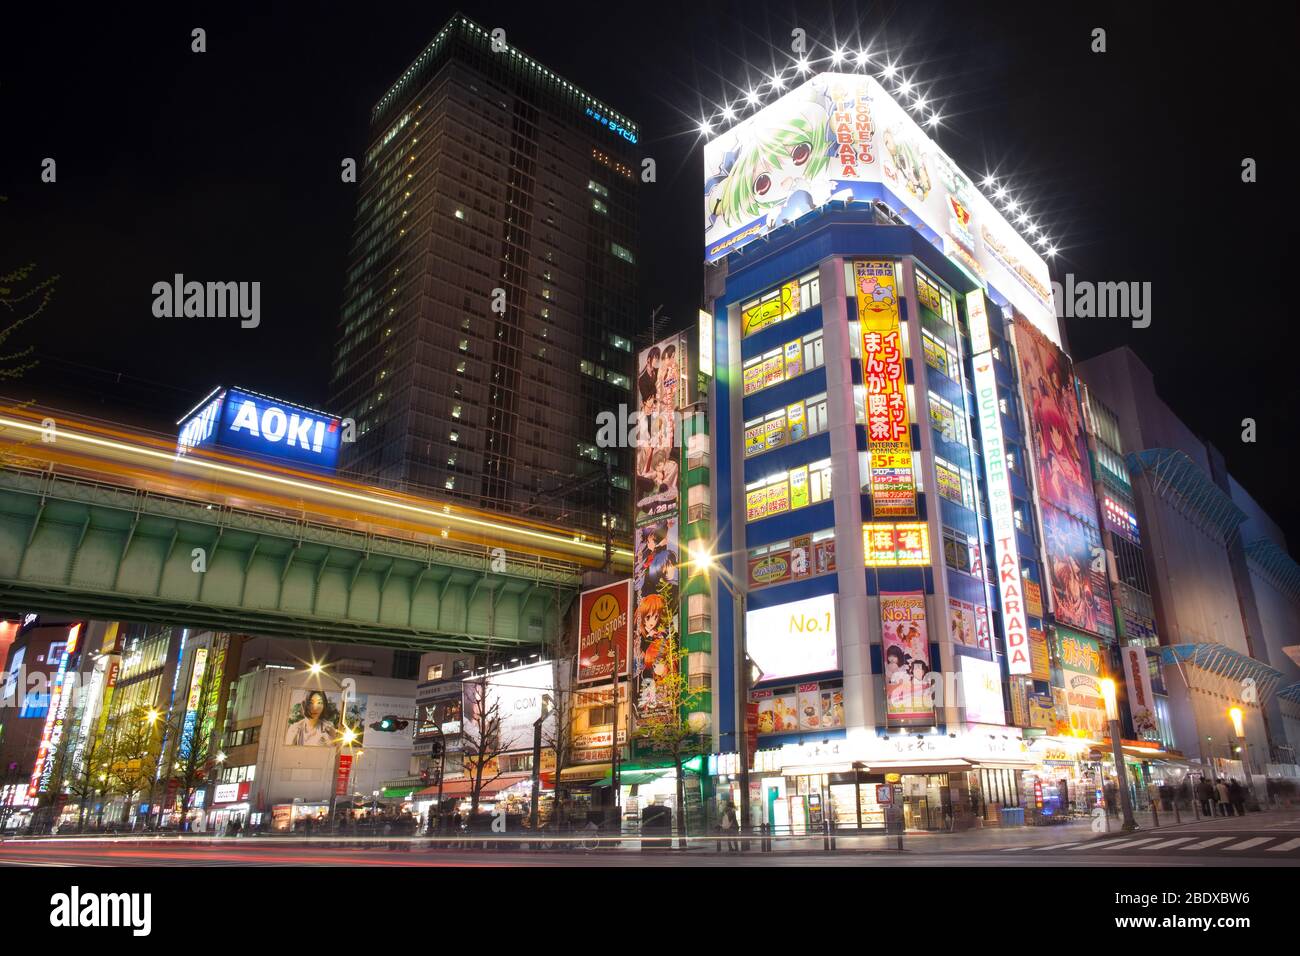 Akihabara Electric Town, Tokyo, Kanto Region, Honshu, Japan - Illuminated buildings full of advertising signs in a shopping district. Stock Photo